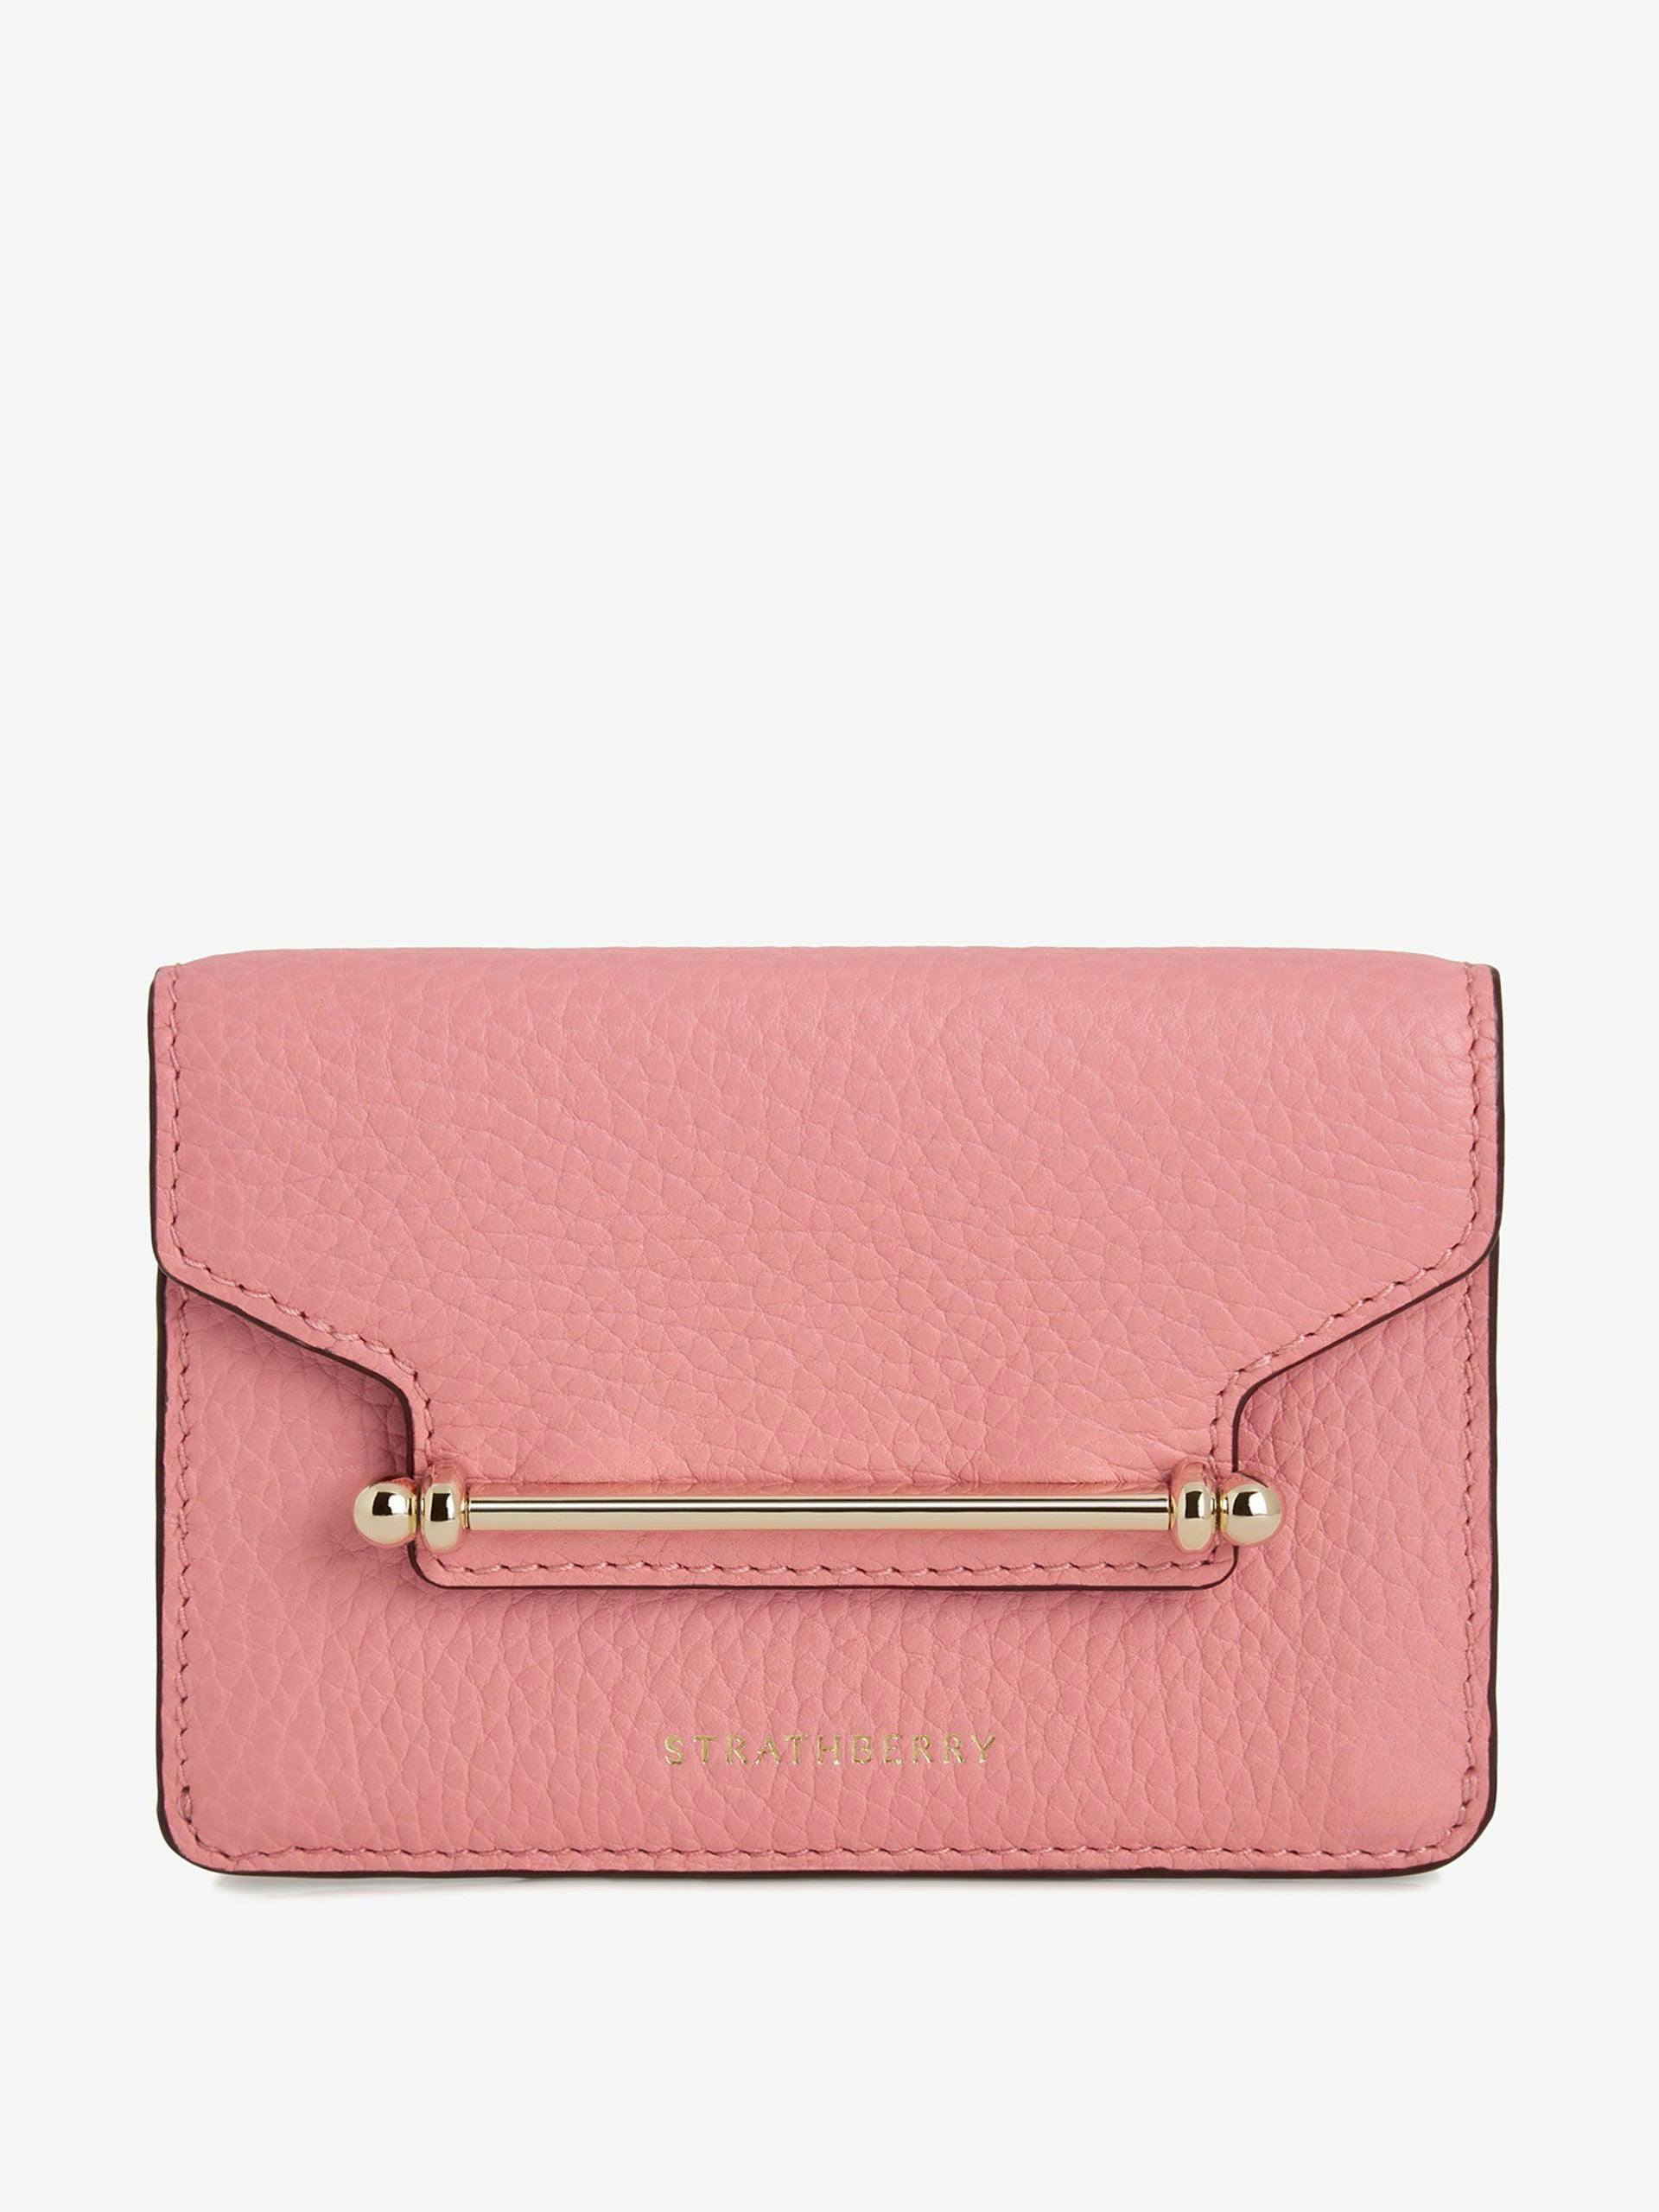 Candy pink Multrees compact wallet